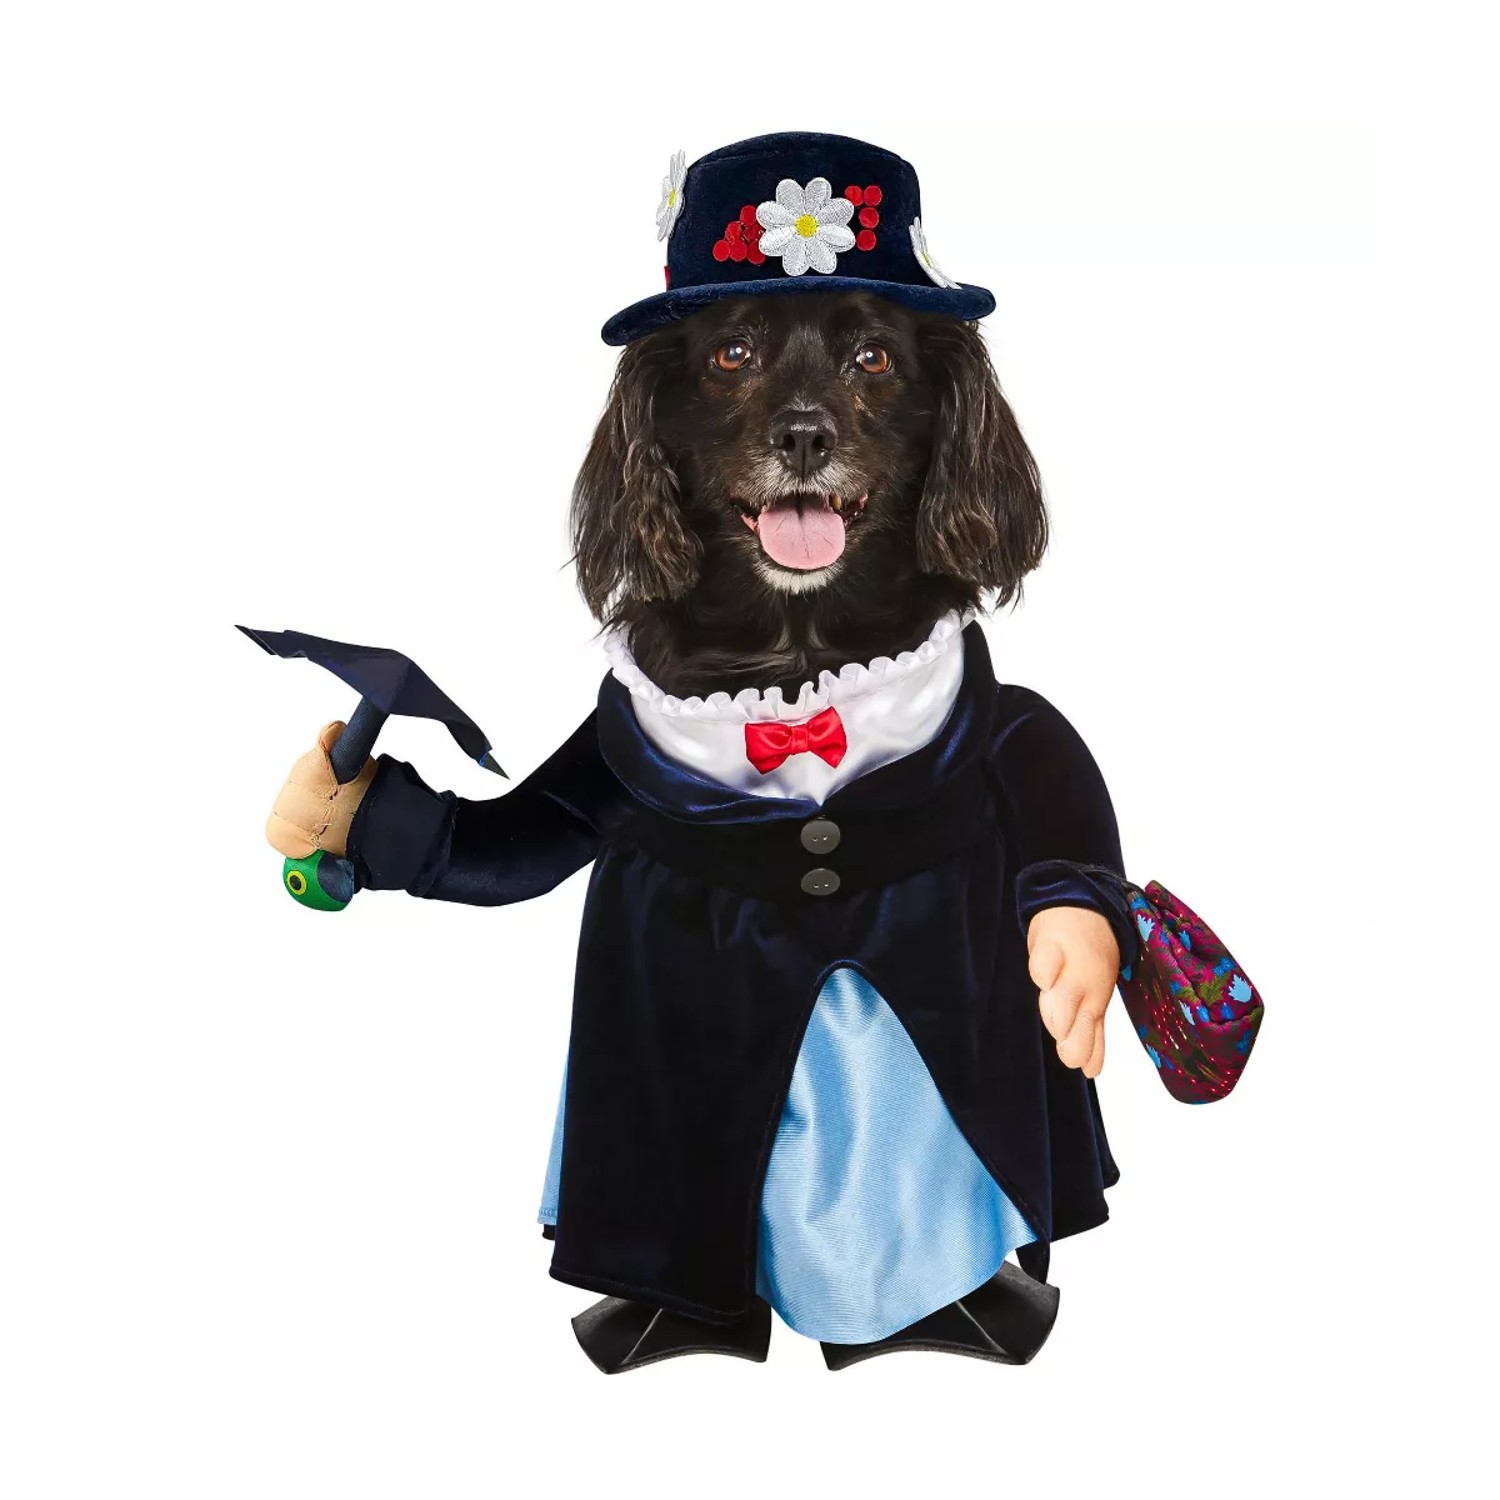 Disney Walking Mary Poppins Dog Costume by Rubies